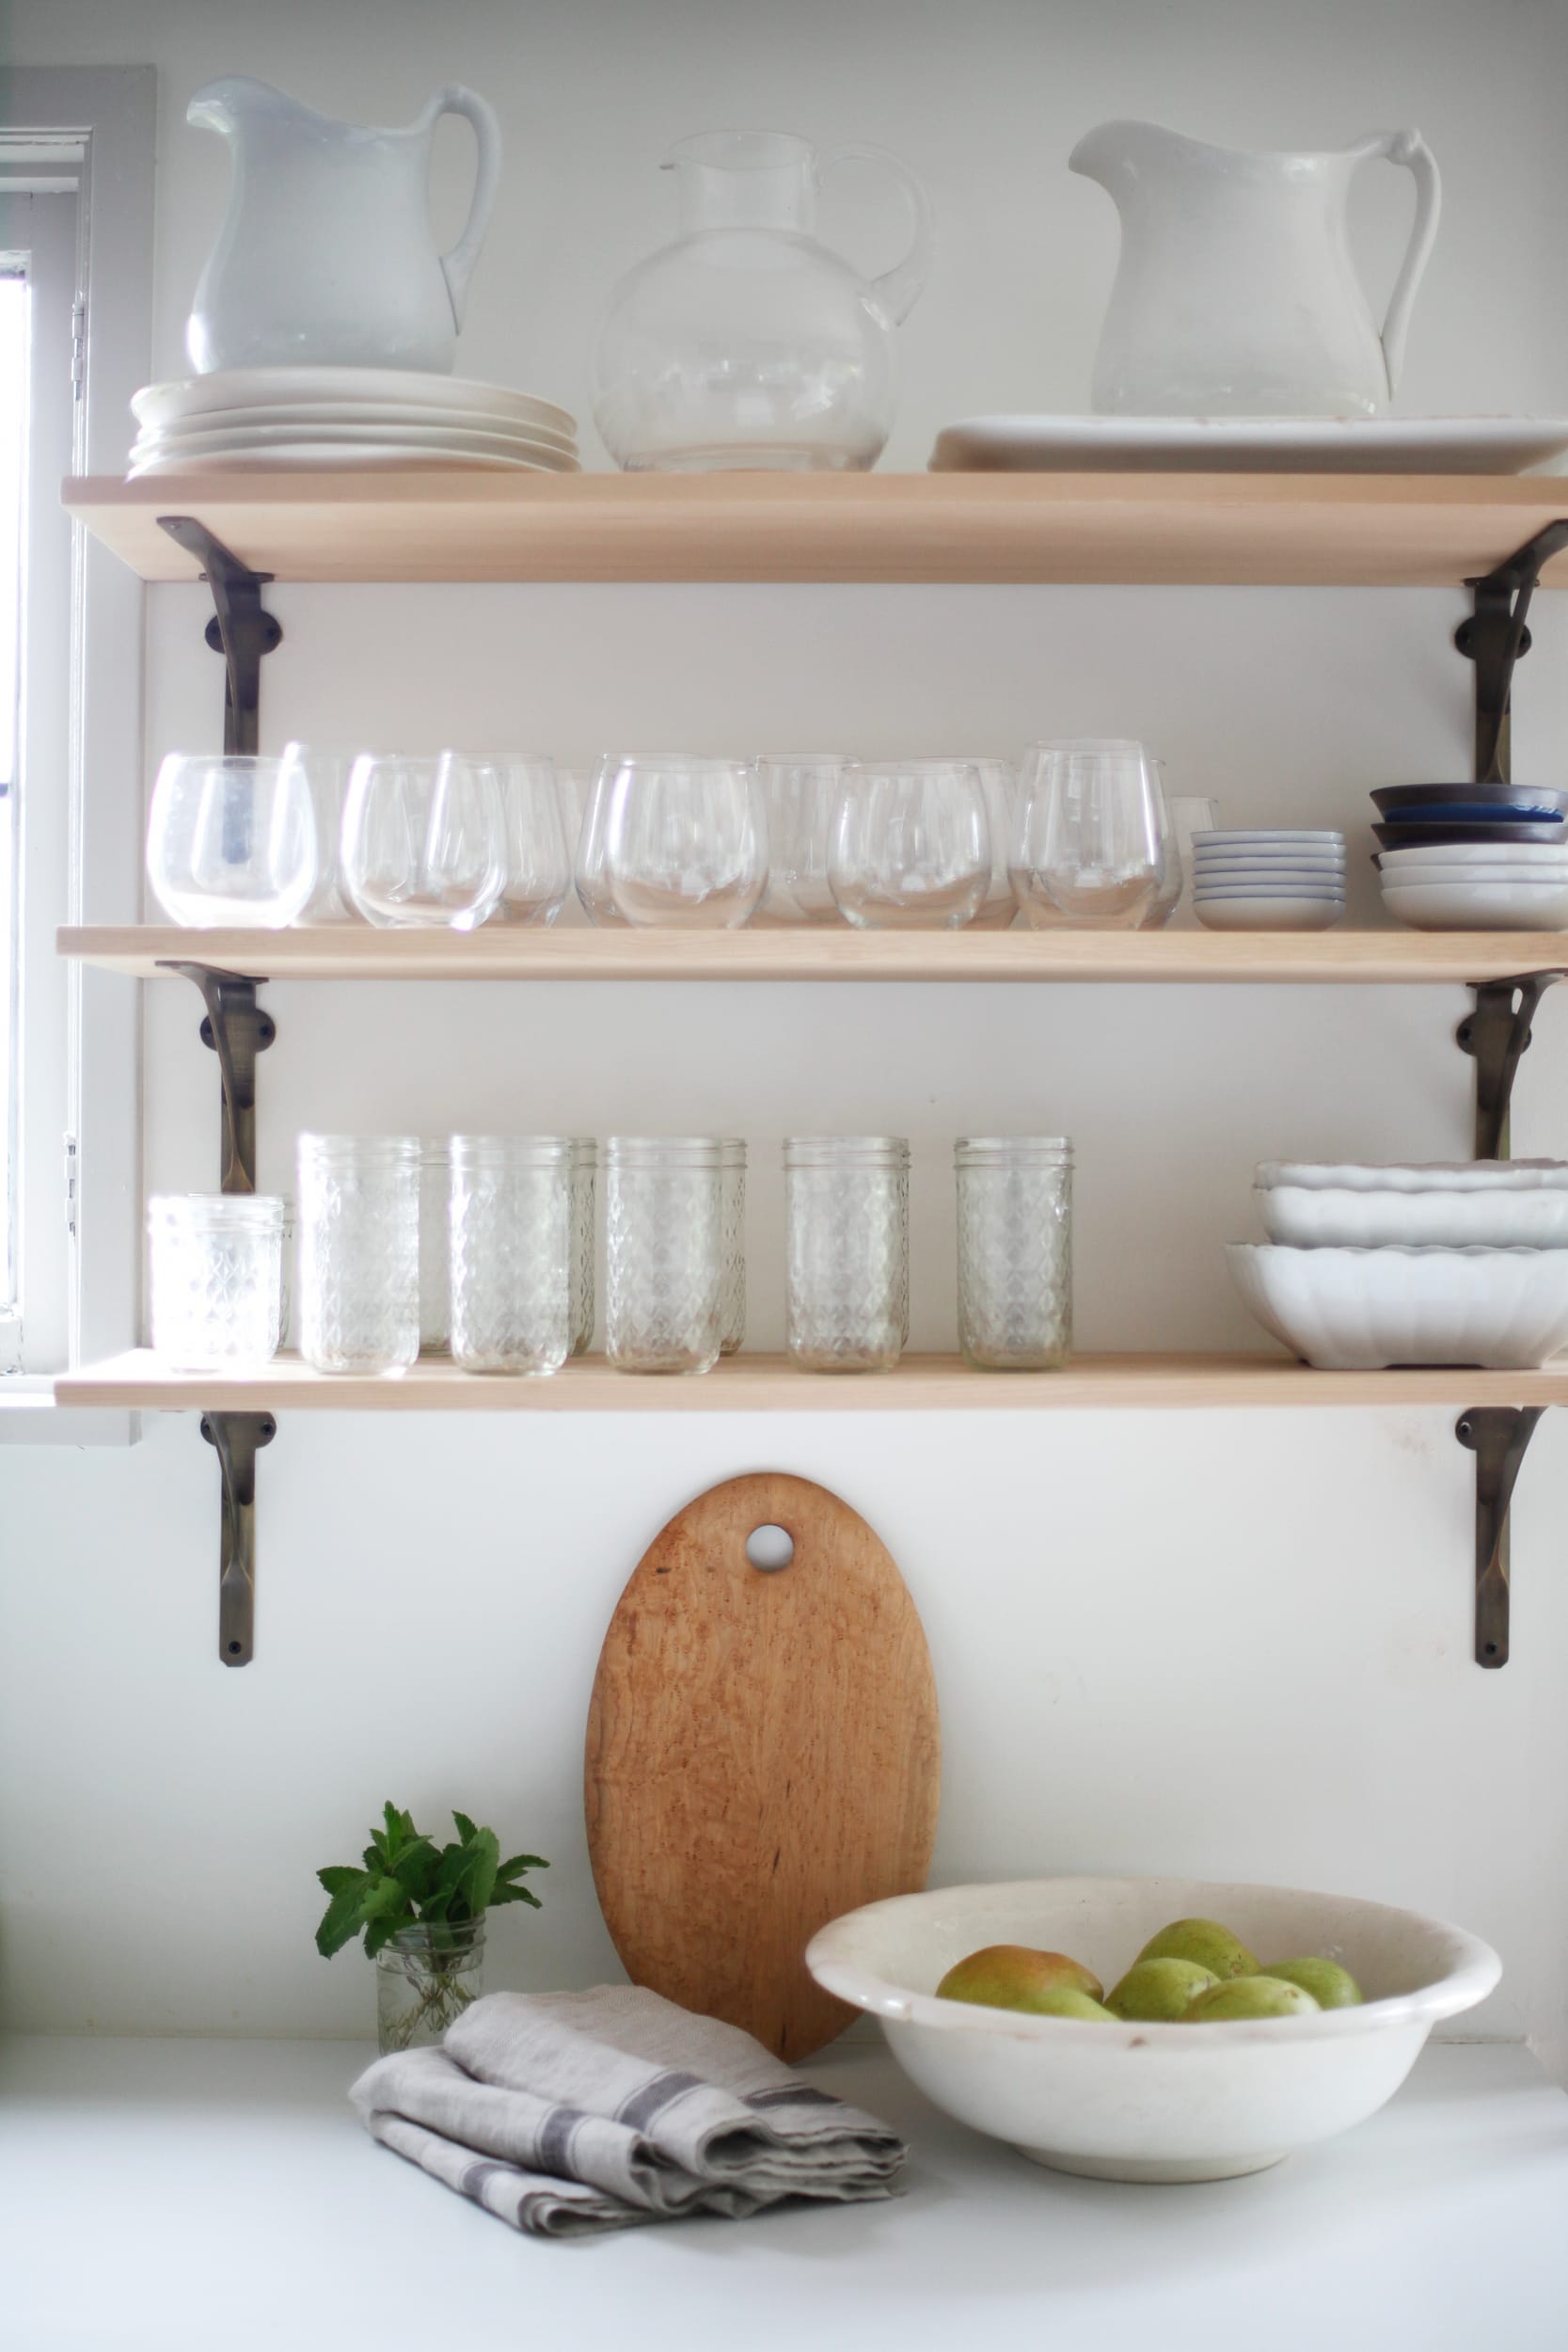 Open shelving in remodeled kitchen